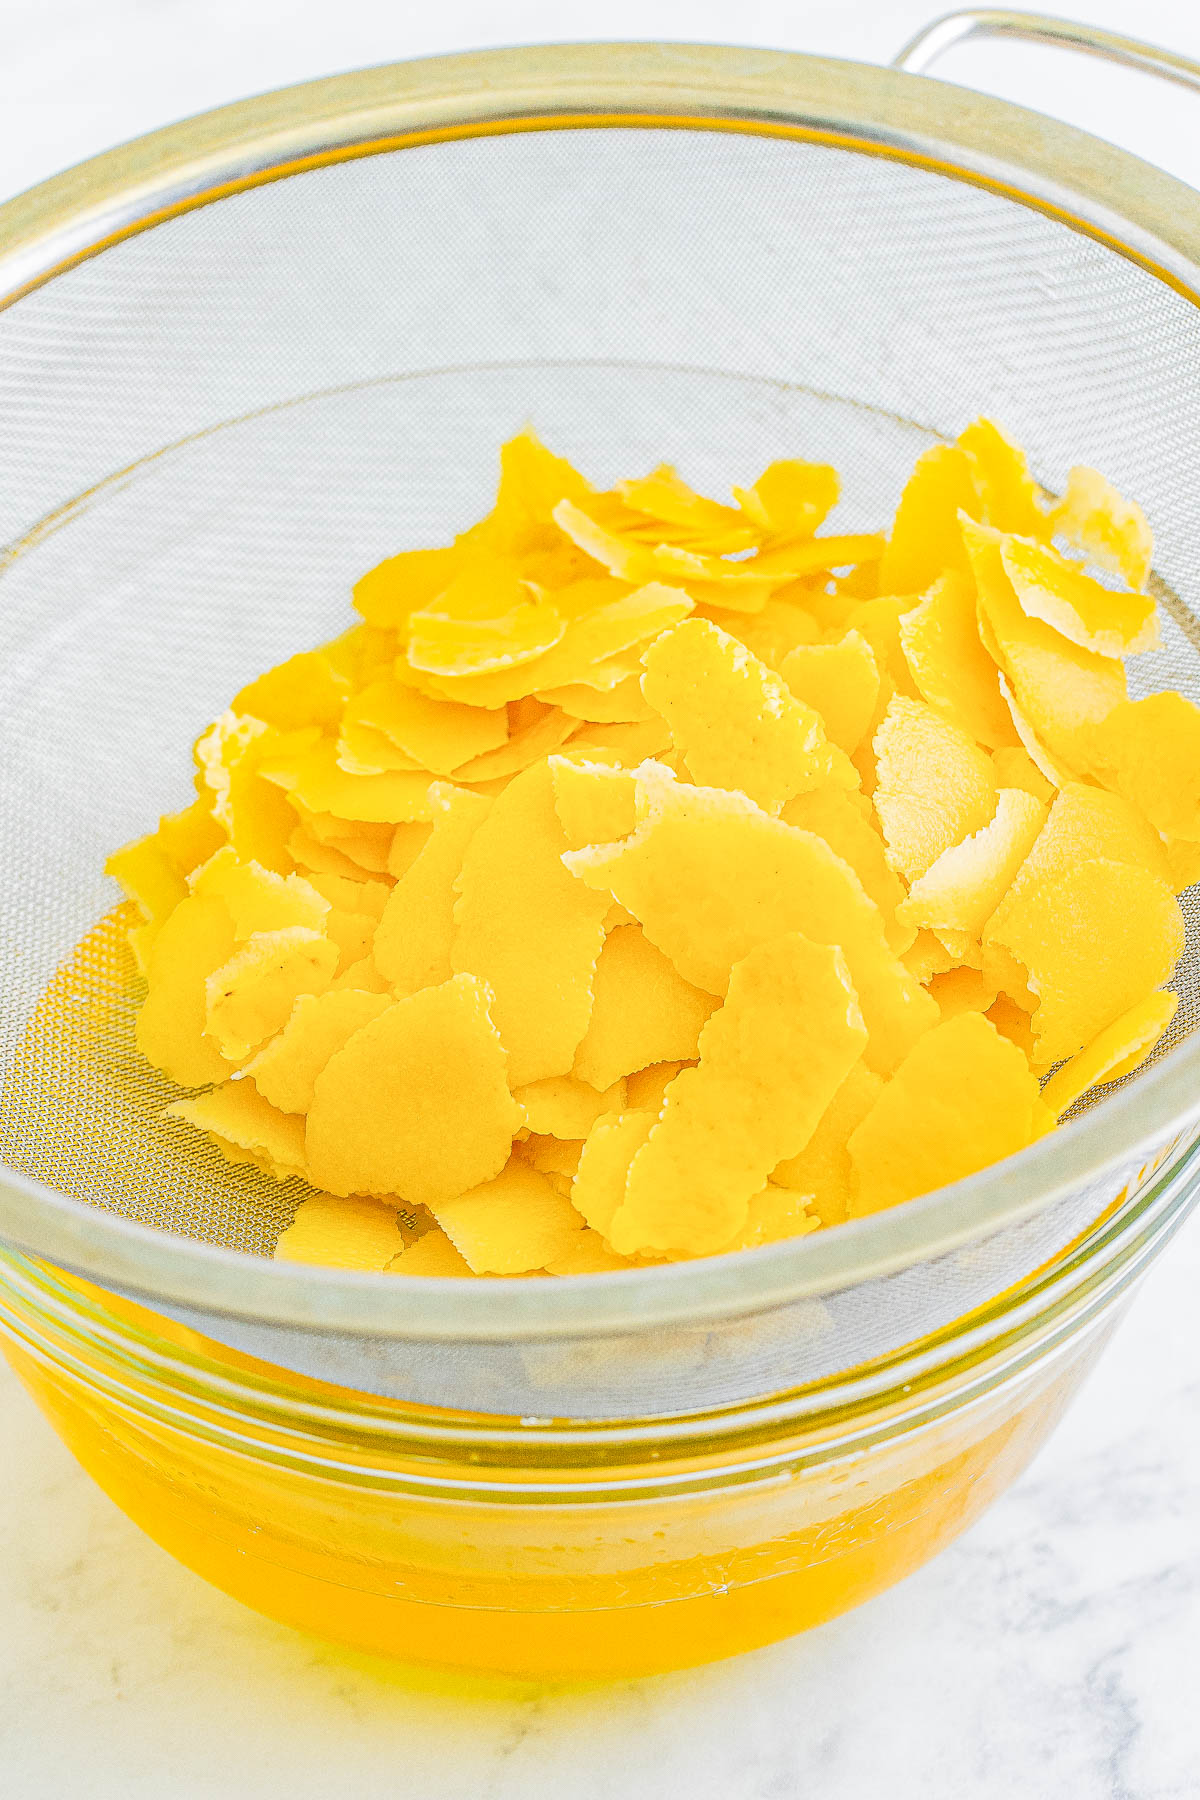 Lemon peels being strained in a sieve above a bowl to catch the juice.